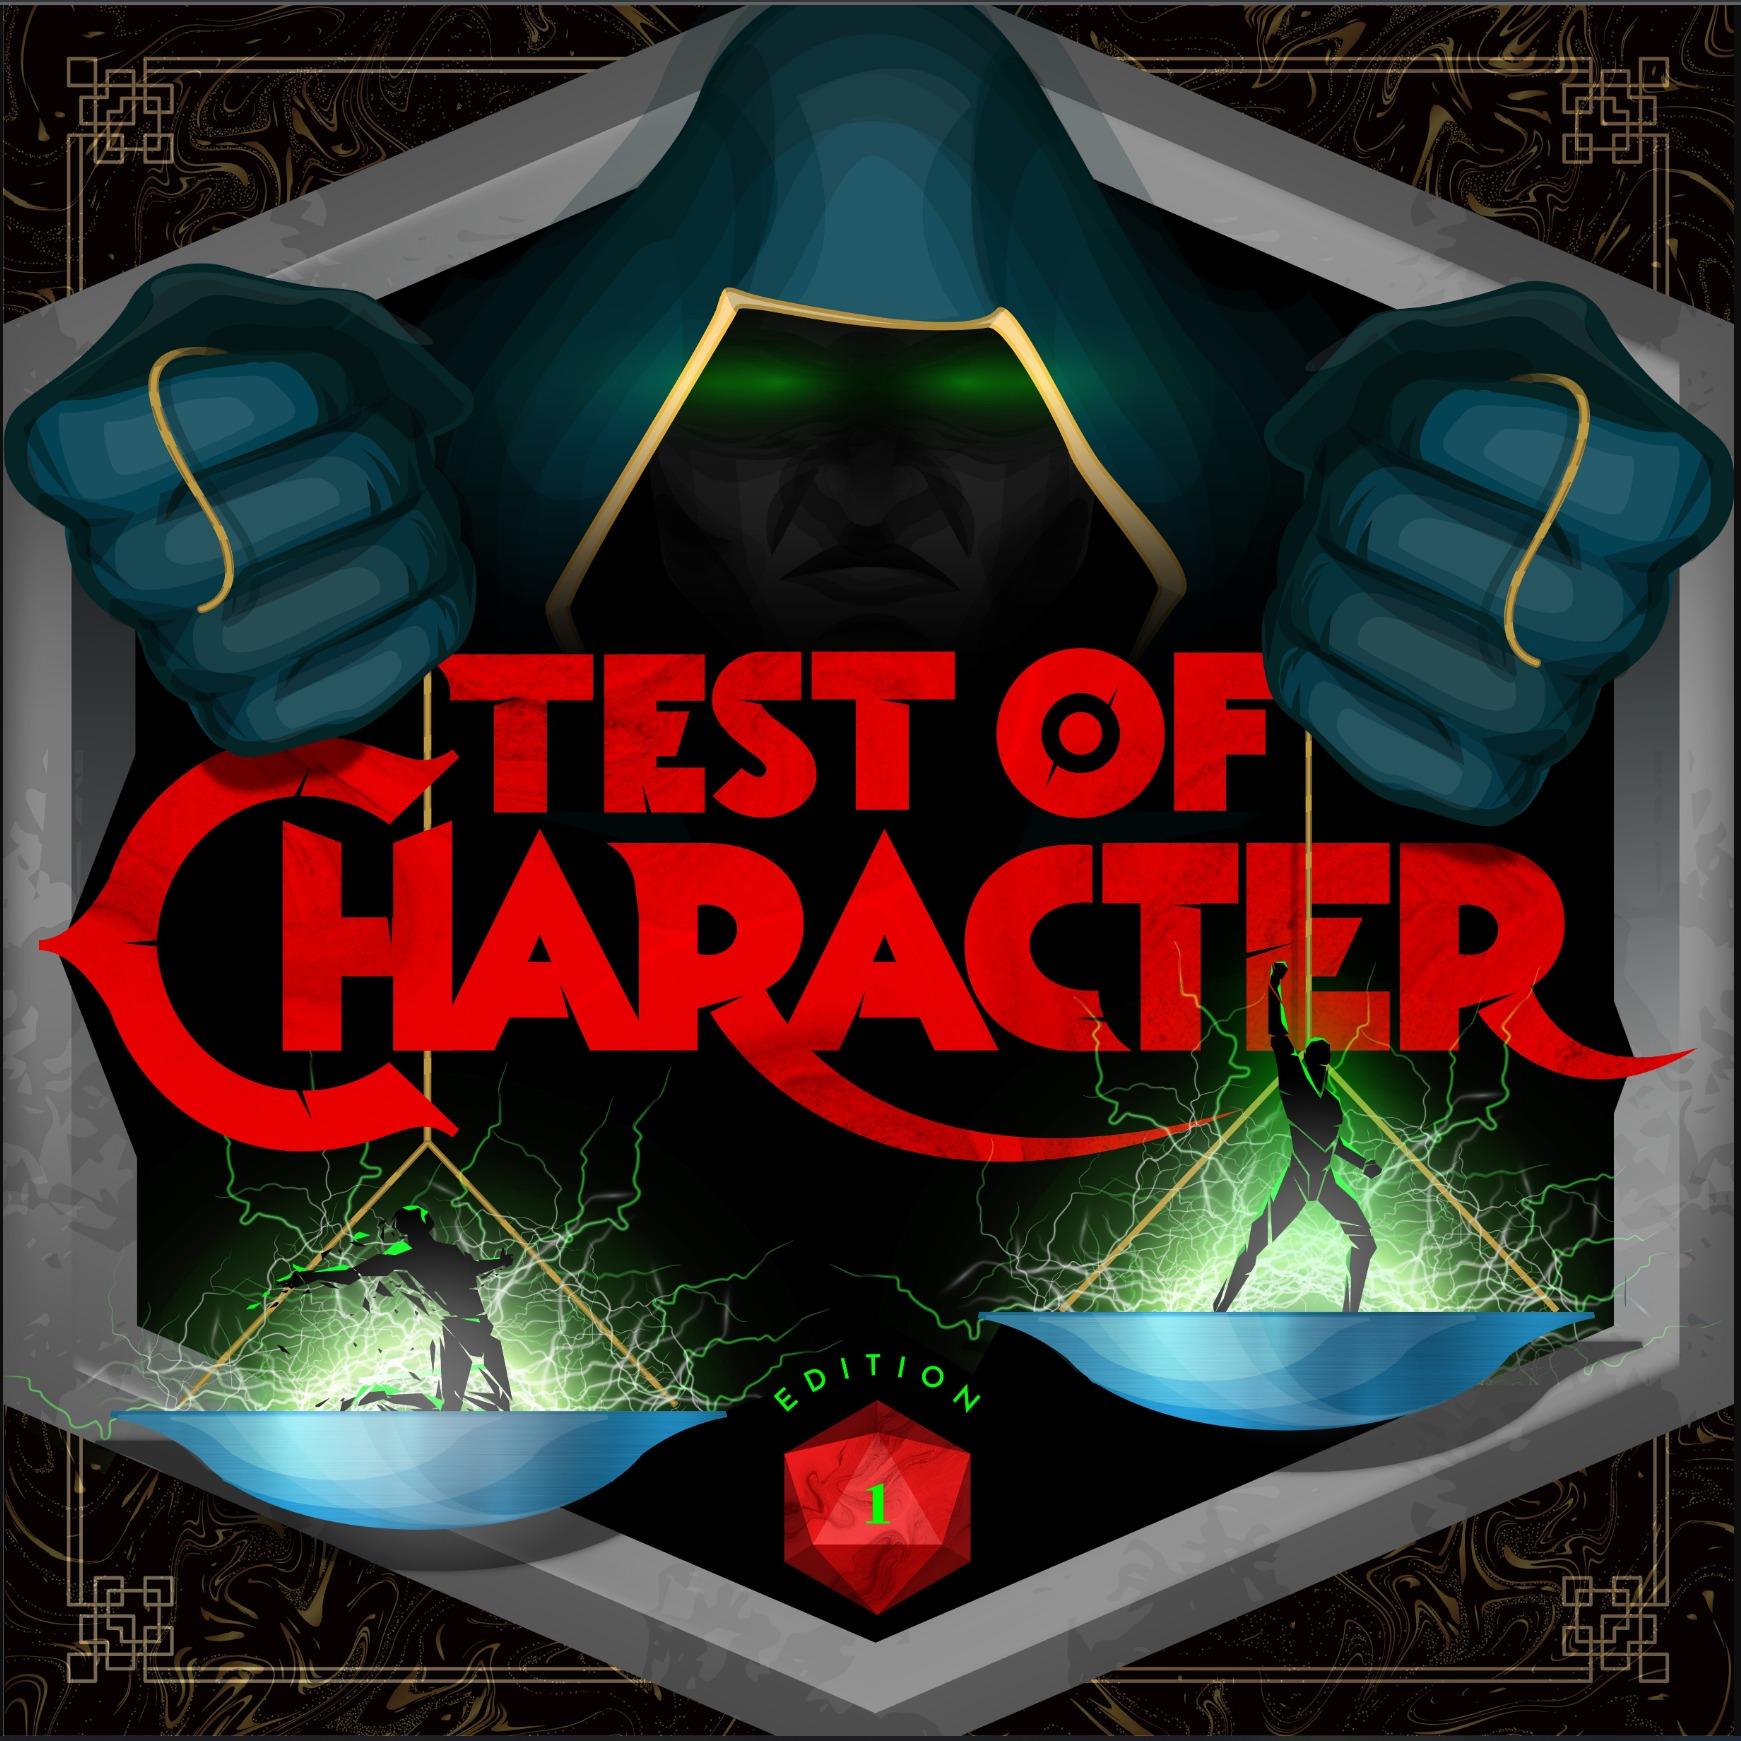 Test of Character